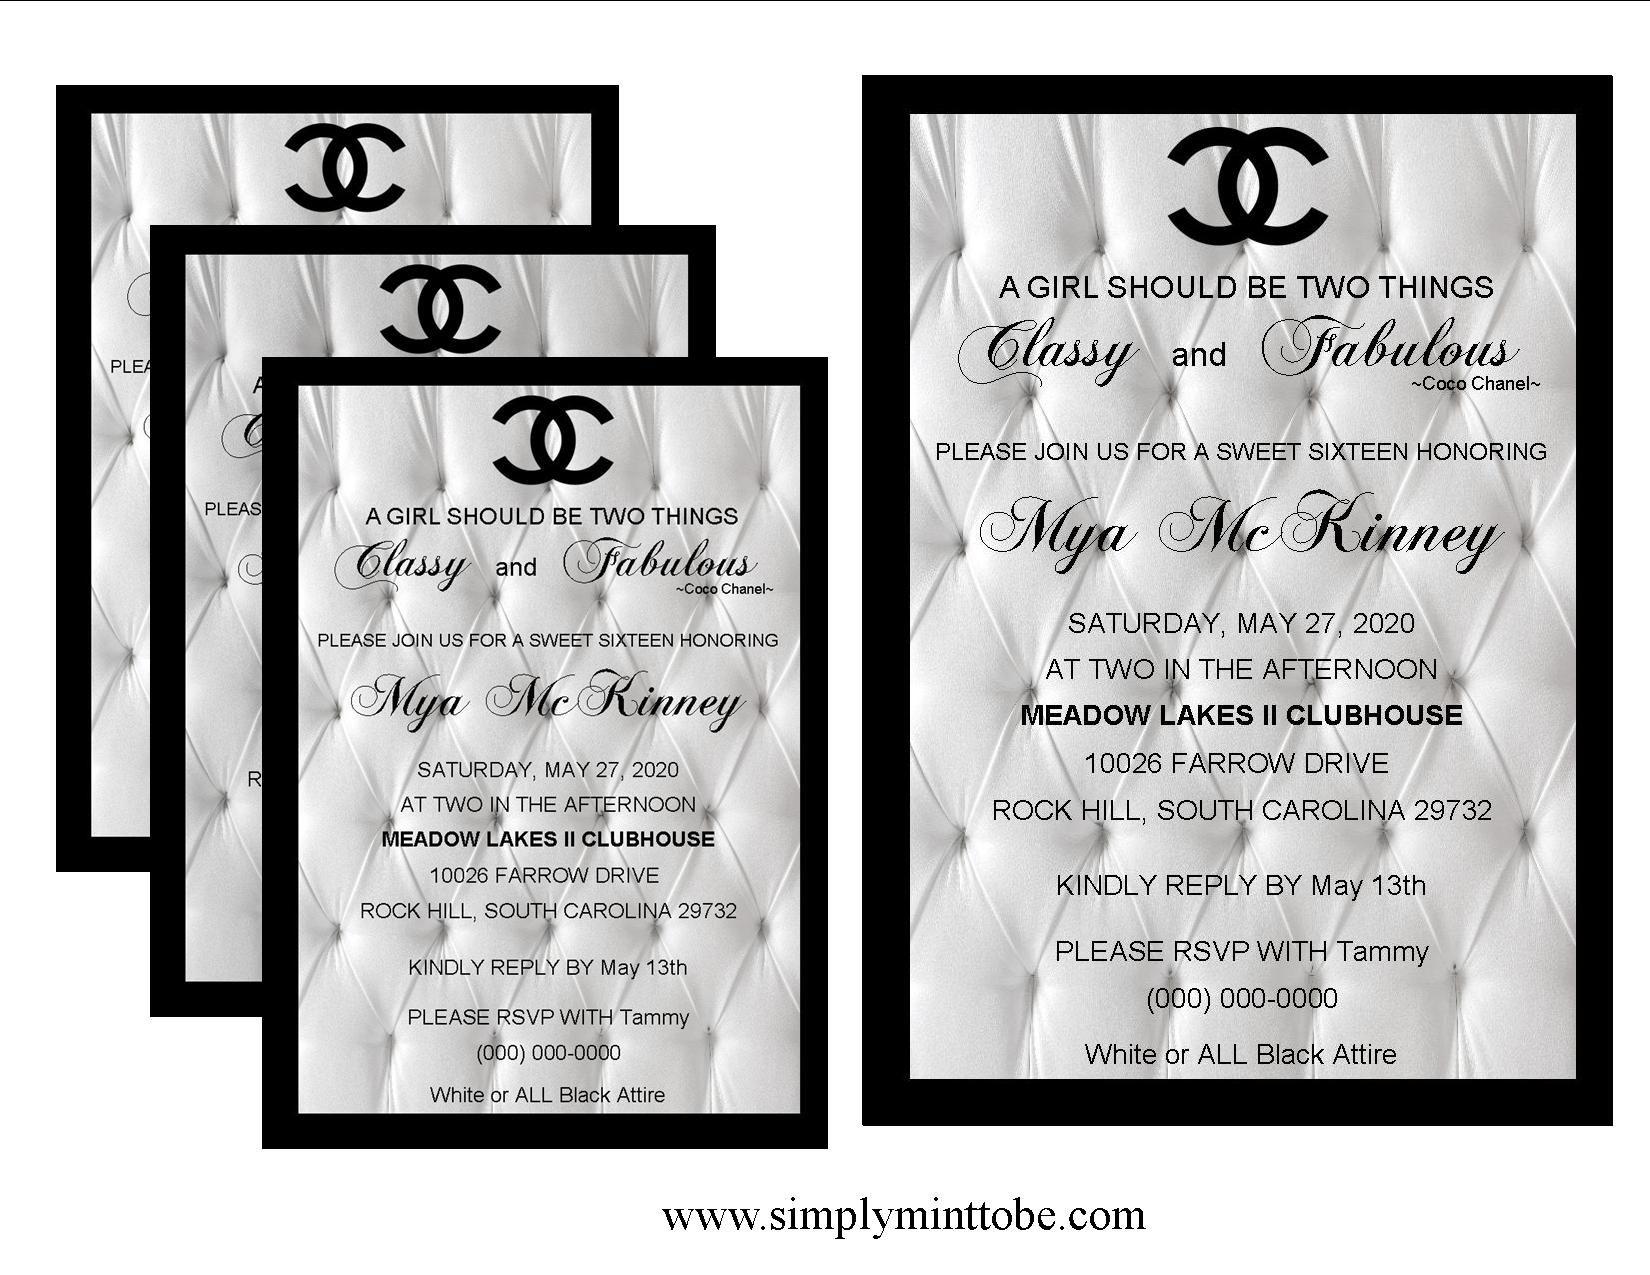 Large Chanel Logo - Coco Chanel Classy and Fabulous Inspired Large White Sweet 16 ...